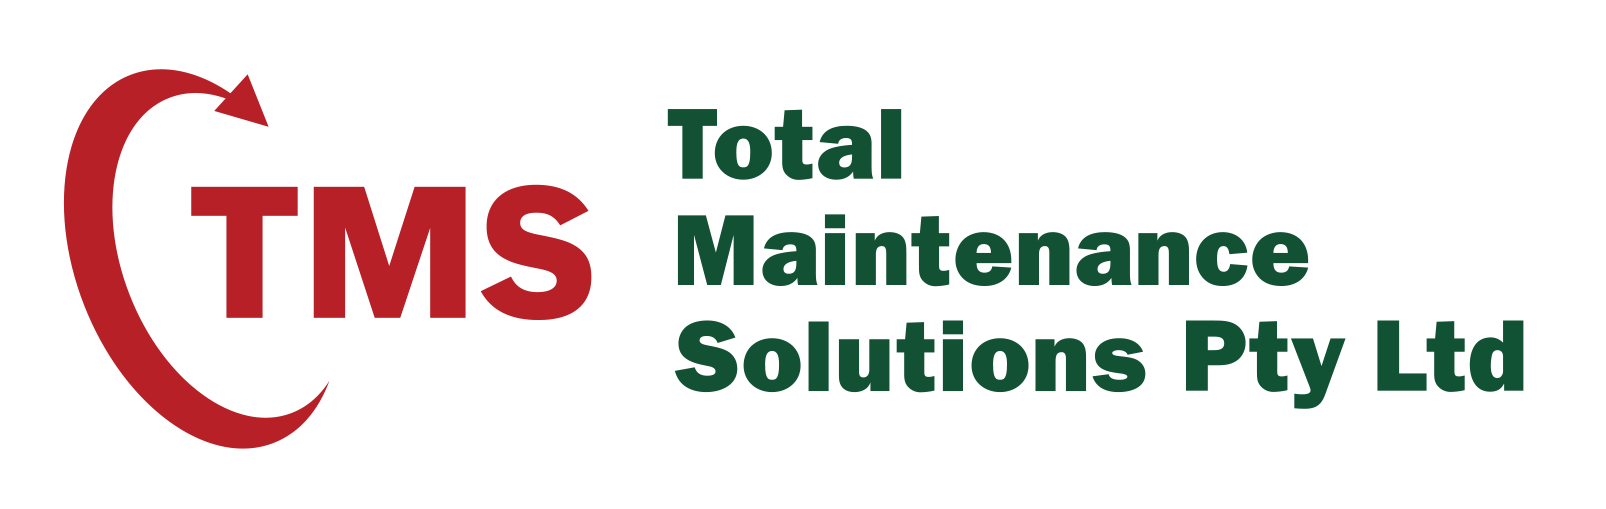 Total Maintenance Solutions